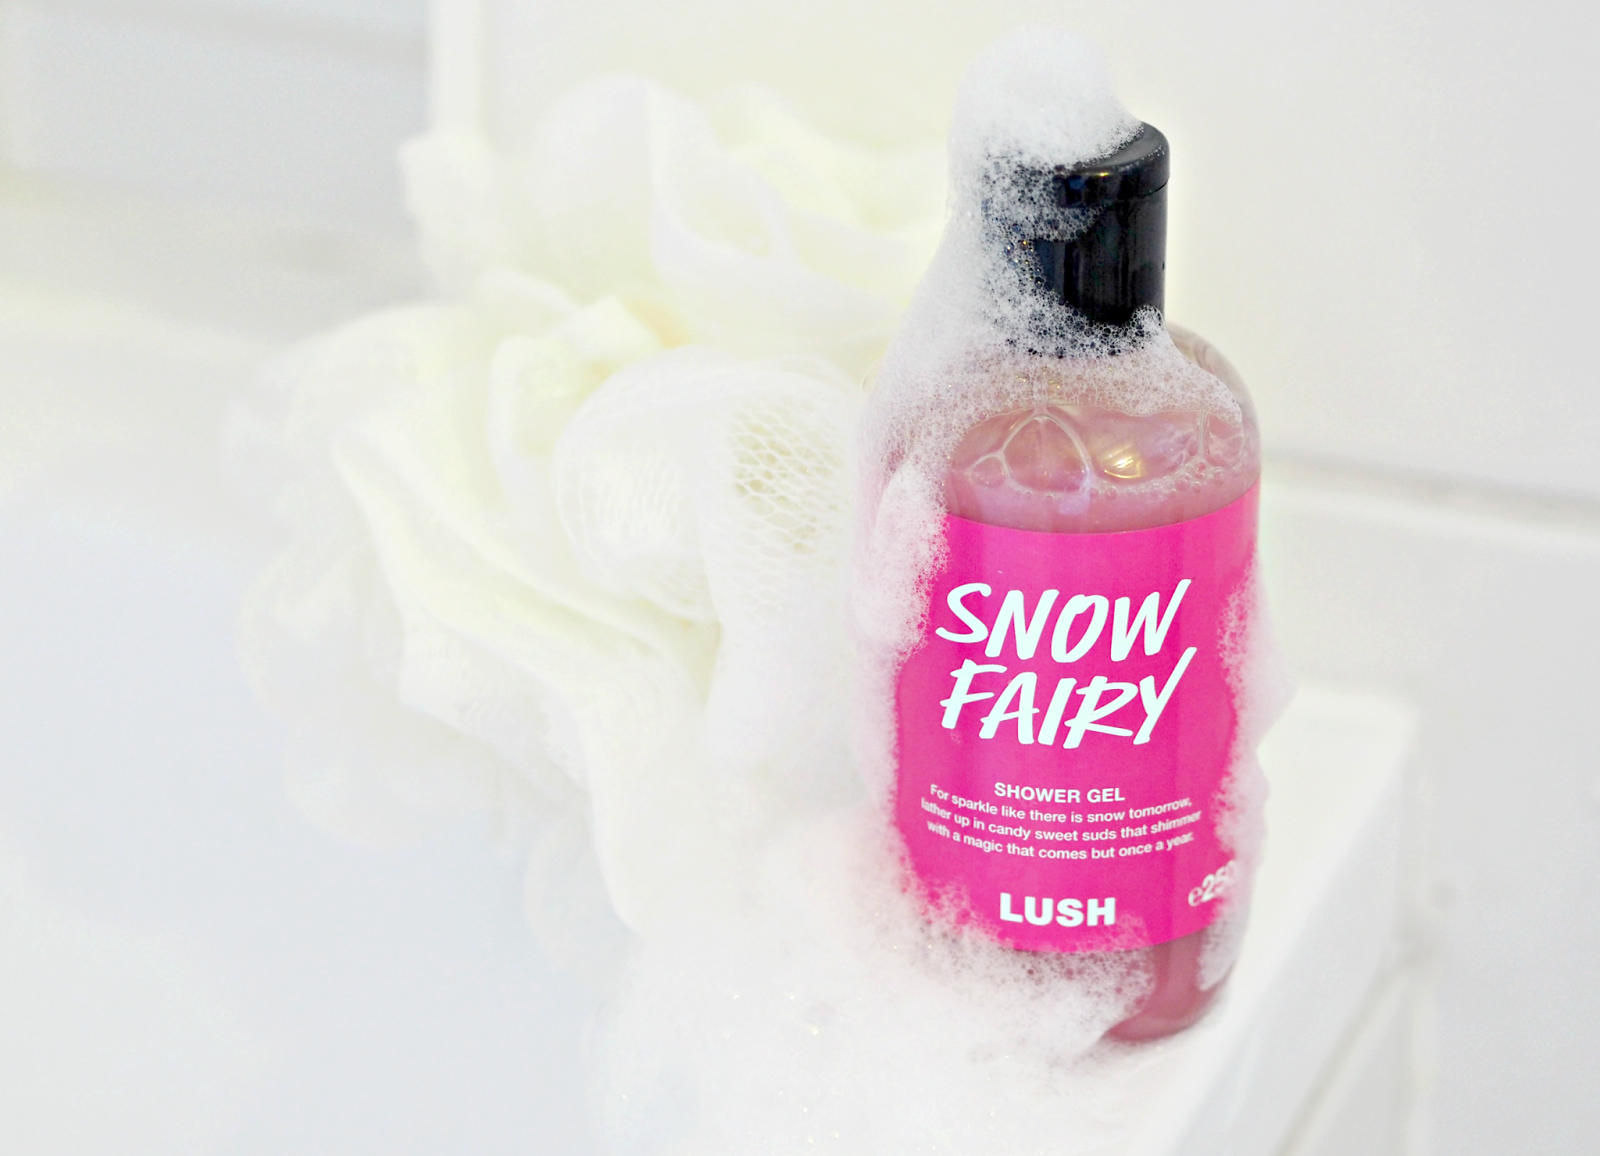 An Ode To Snow Fairy: Why This Festive Treat Has A Special Place In My Heart